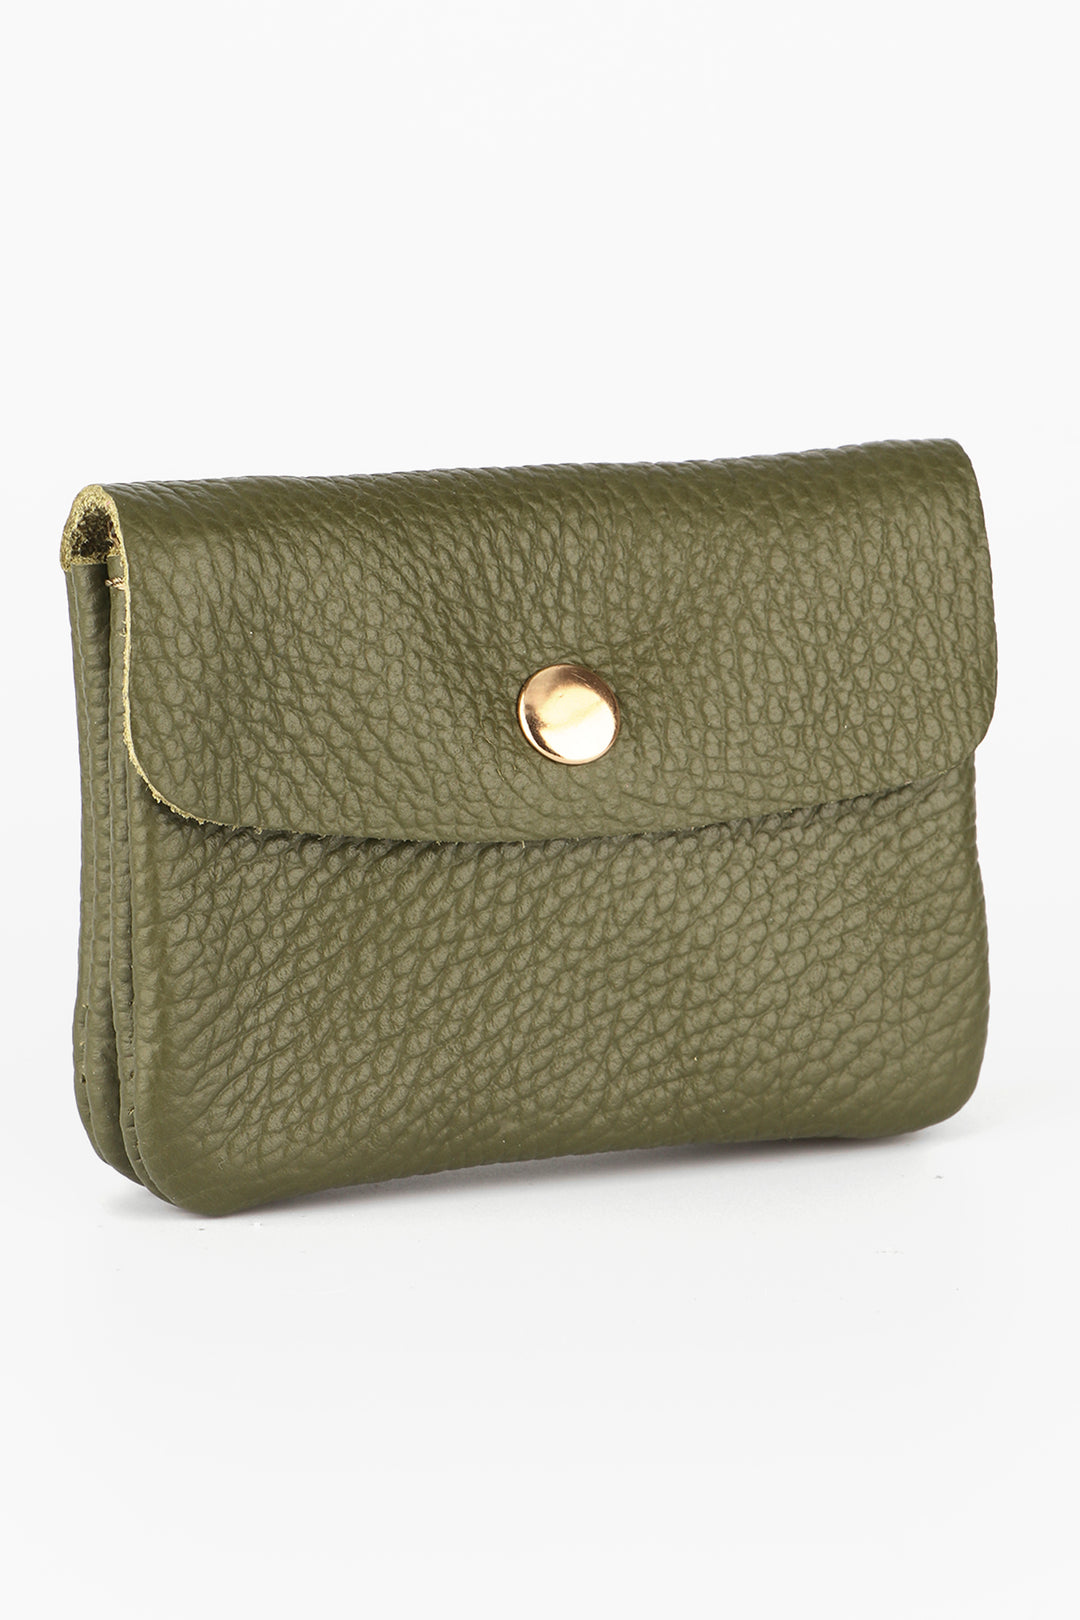 khaki green leather coin purse with a snap button closure on the outside